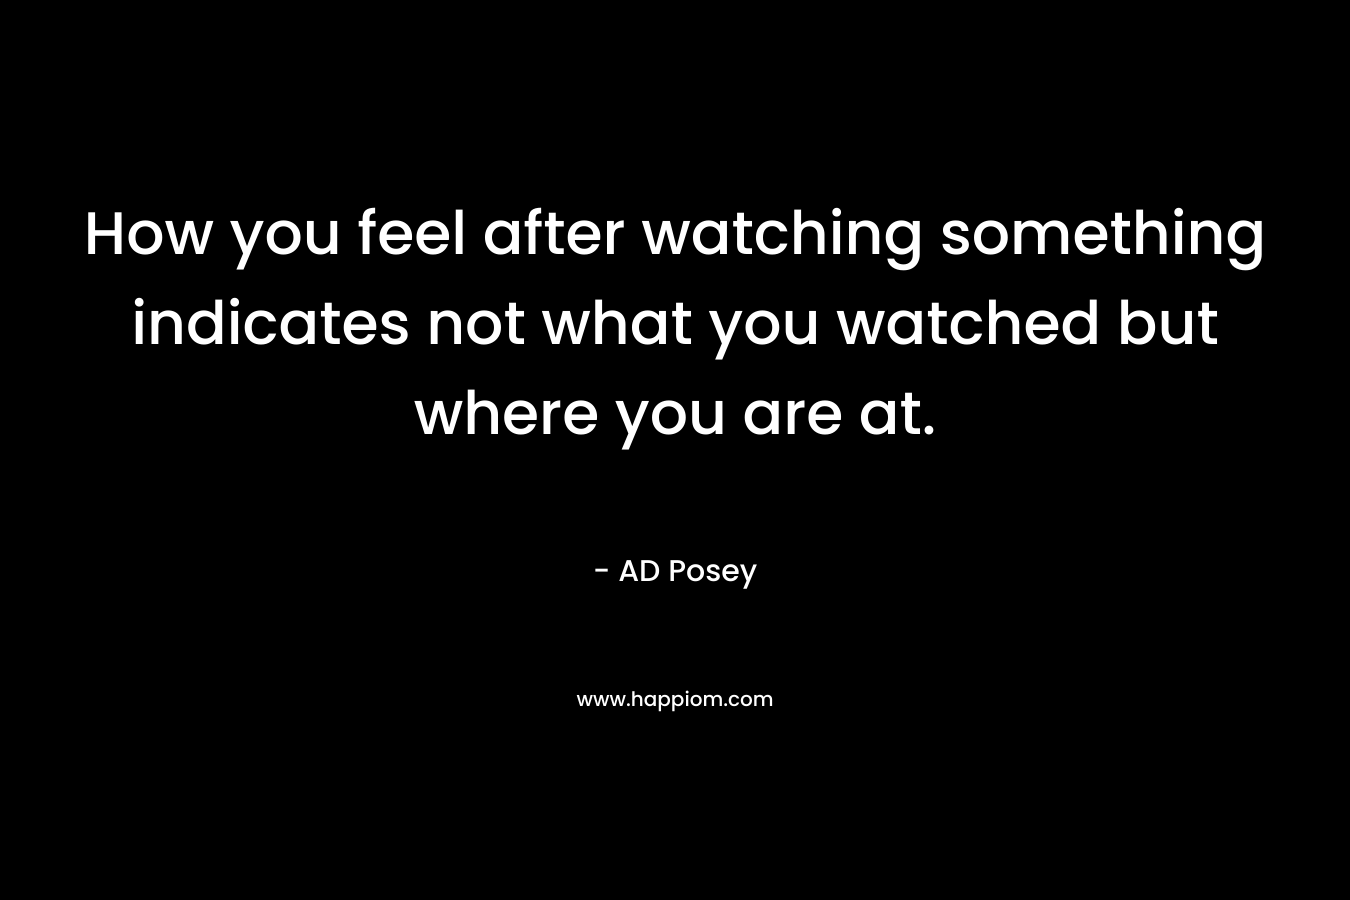 How you feel after watching something indicates not what you watched but where you are at.